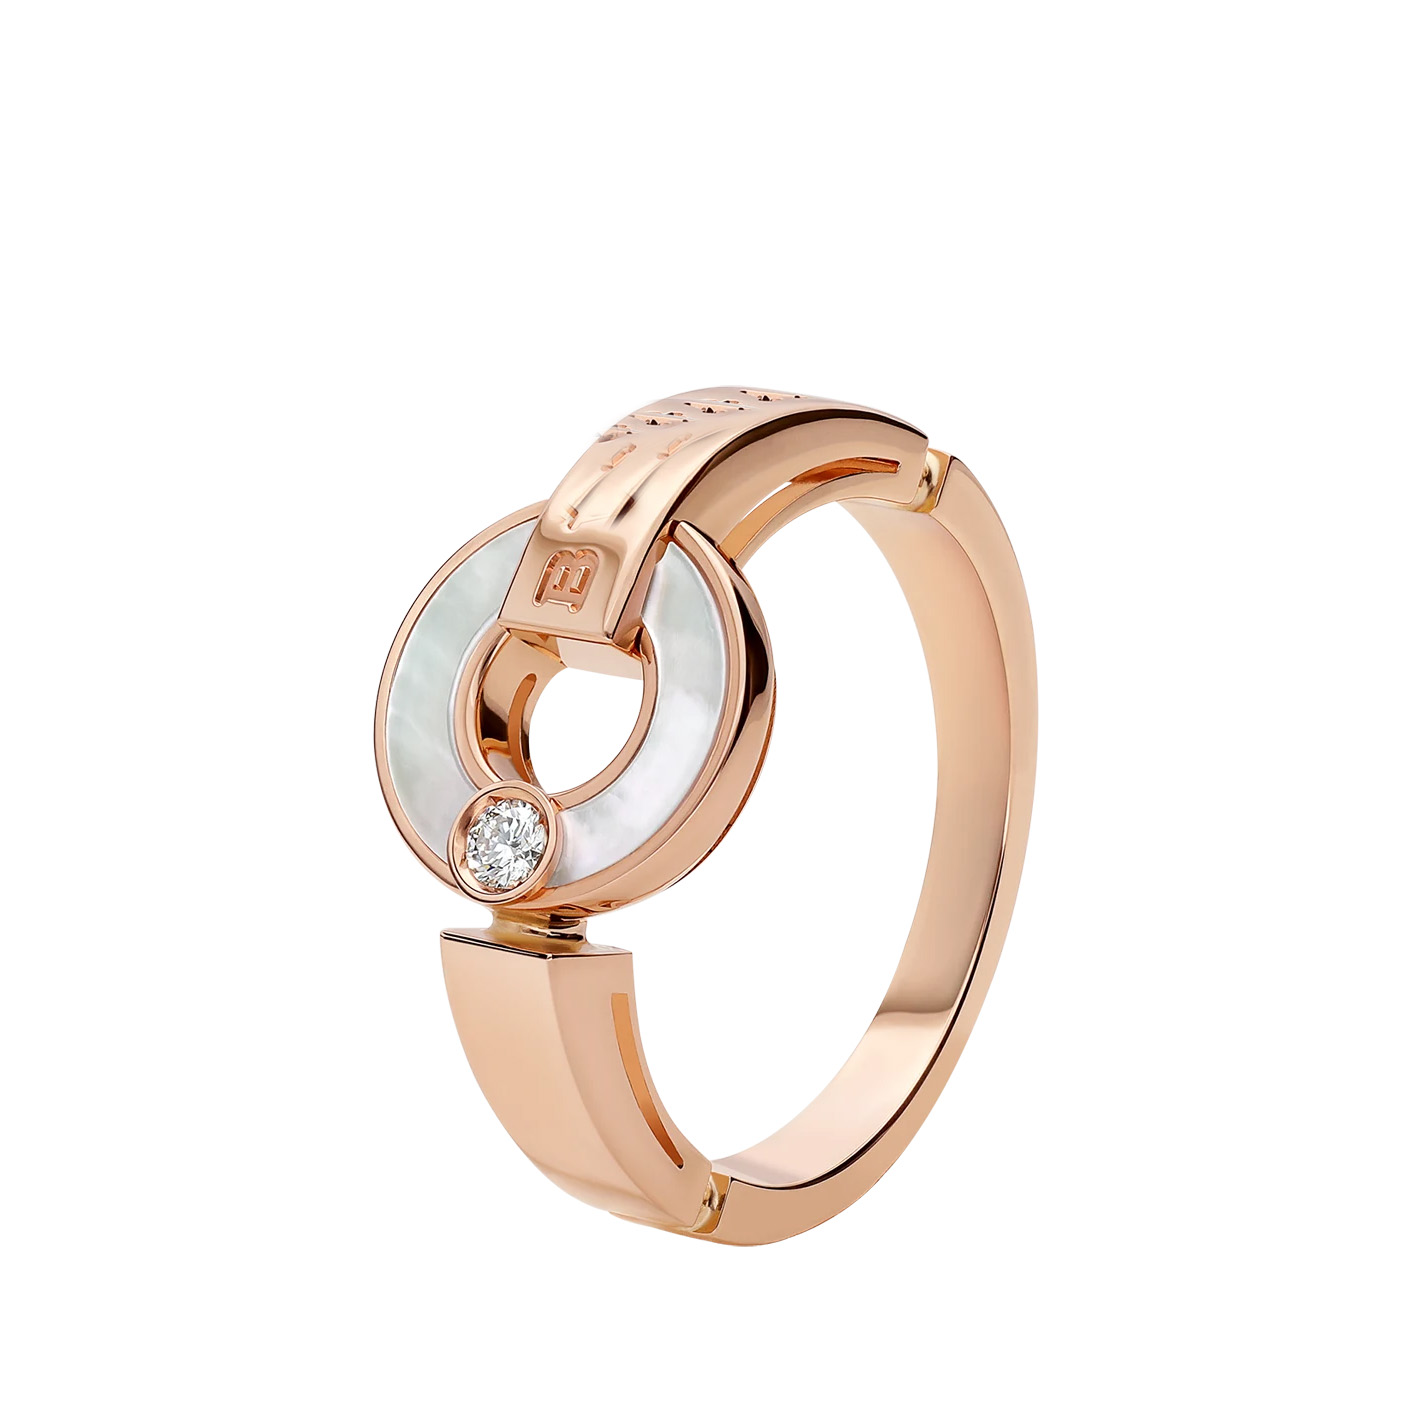 Wholesale Custom design OEM/ODM Jewelry Openwork 18 kt rose gold ring set with mother-of-pearl elements and a round brilliant-cut diamond OEM Jewelry Manufacturer